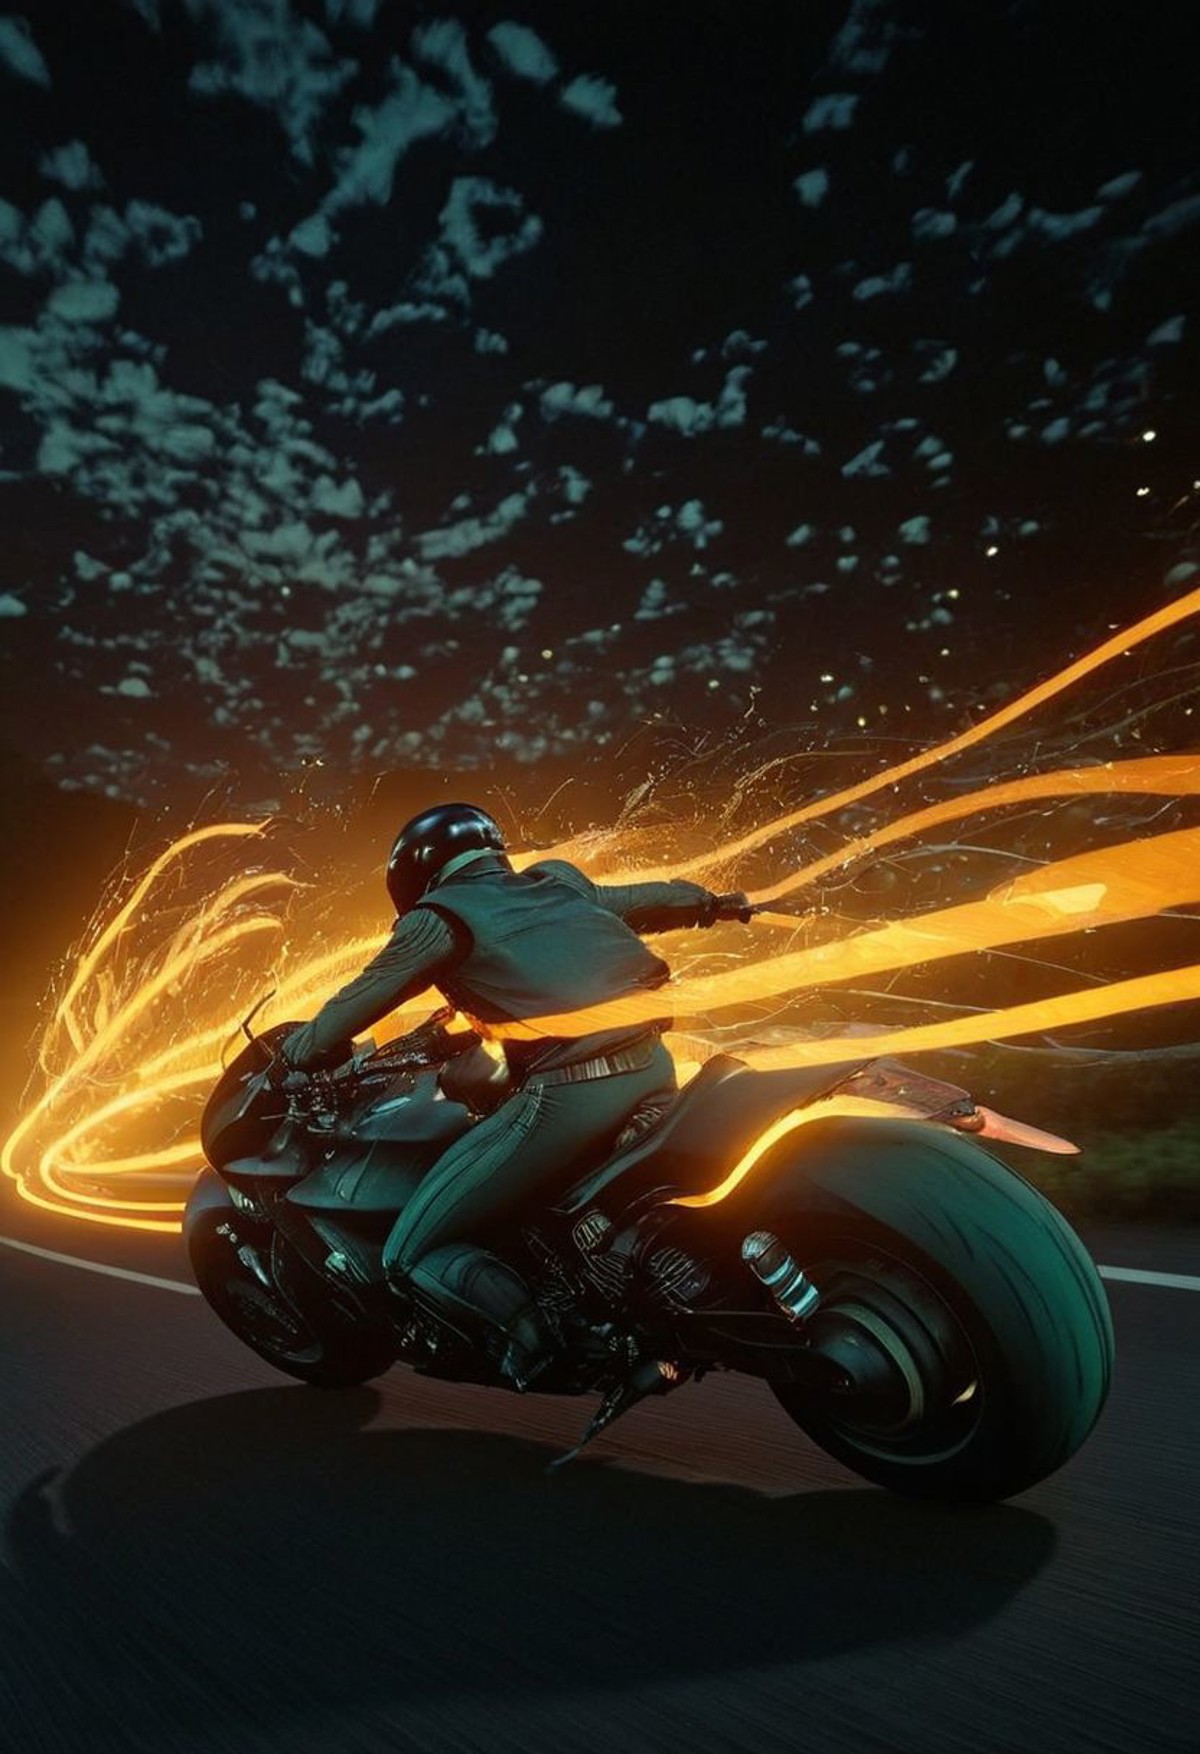 Rear View, Deep black Photorealistic bf-style, a dreamy vibrant fairy elfish motorbike resembling a Dragon in motion with ...